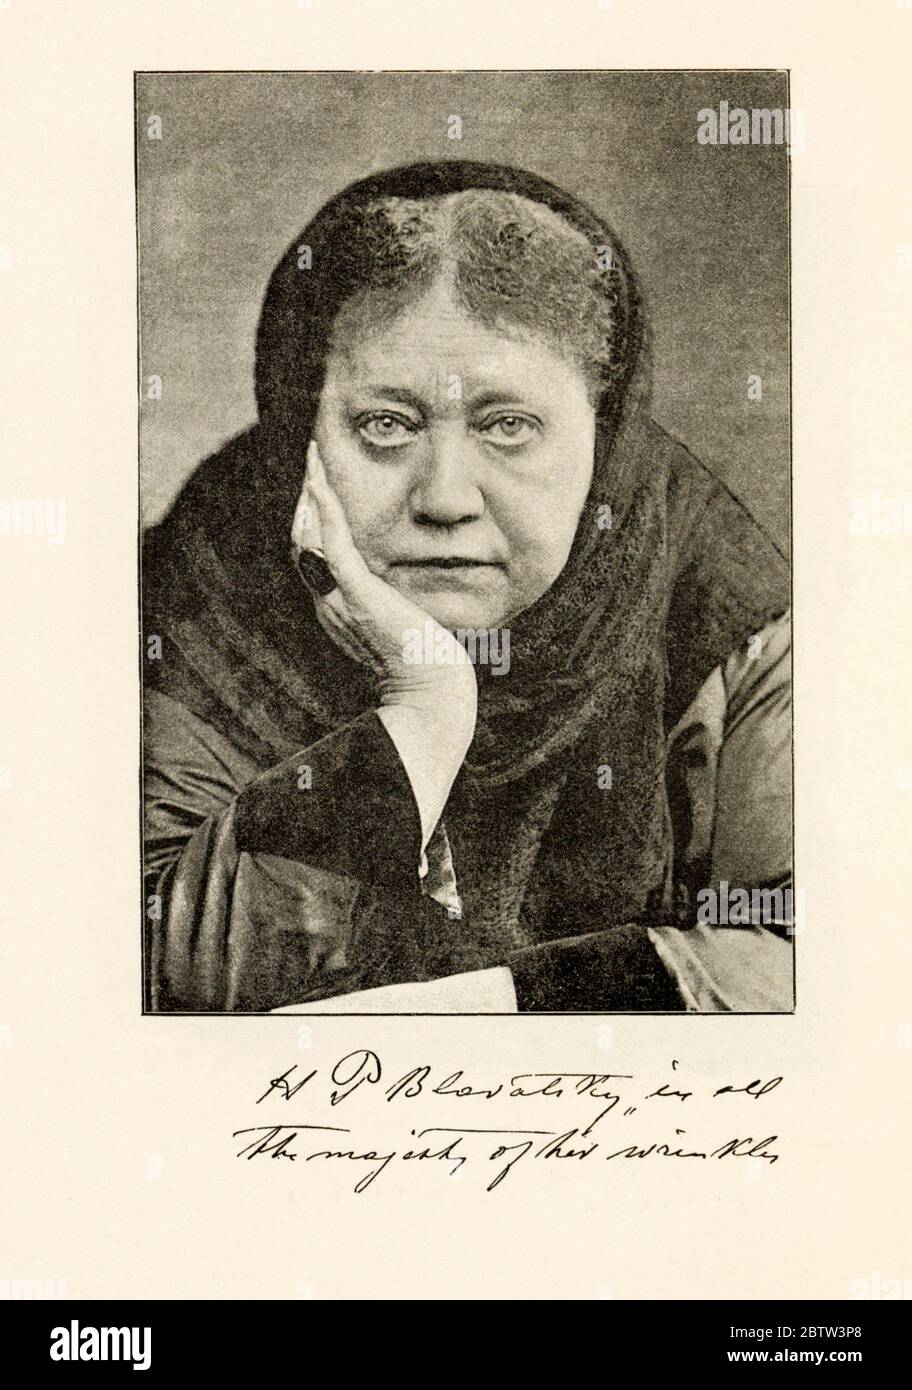 1890 c. , USA : The russian-born Madame Helena Petrovna BLAVATSKY von Hahn ( 1831 - 1891 ). Celebrated woman Theosopyst , phylosopher , occultist, mystic , spiritualist traveller and writer . Founder of THEOSOPHICAL SOCIETY in 1875 . In this photo with the ring of HIGHT PRIESTESS with symbol of Theosophy: ring with green stoneflecked with veins of blood red engraved with interlaced triangles in a circle, with in dian motto Sat ( Life ), was gived to Blavatsky by her Indian teacher Damodar Mavalankar in 1880  .- MEDIUM - Medianità - Sedute spiritiche - spiritualism - theosophy  - OCCULTISMO - O Stock Photo